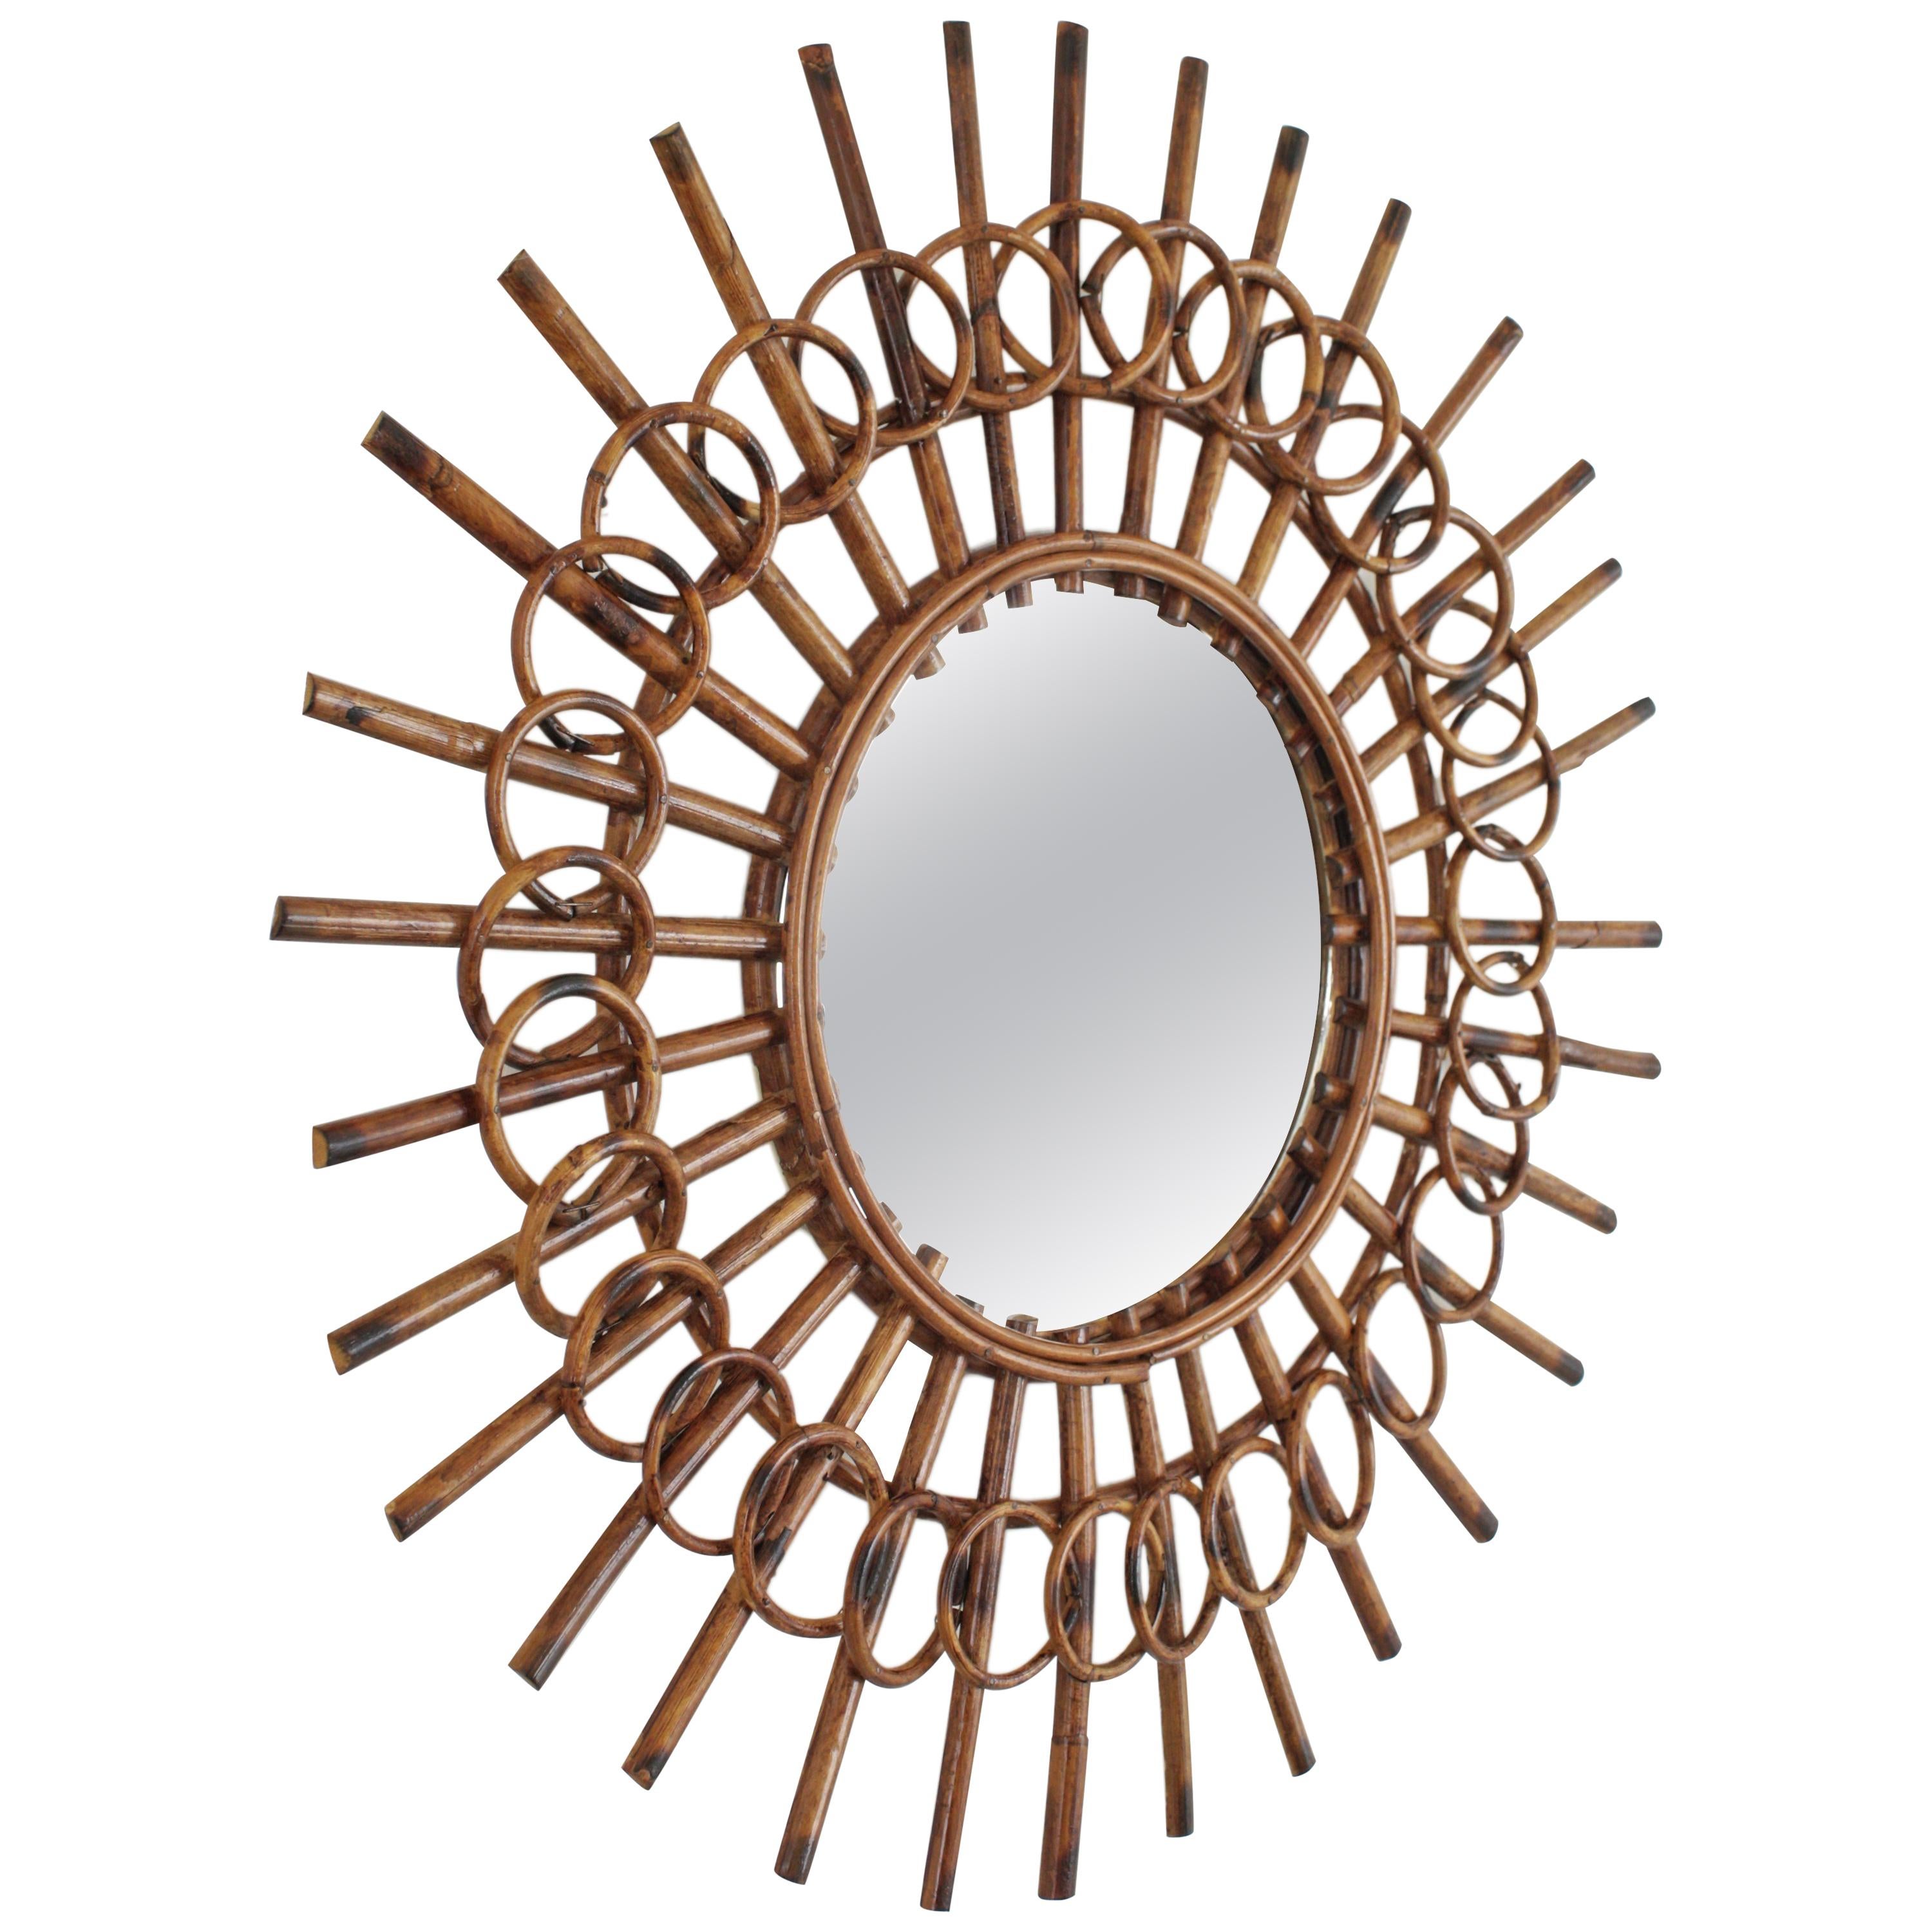 A highly decorative rattan sunburst mirror framed by circles with a lovely color.
This mirror has the French Riviera Mediterranean taste with an unusual handcrafted beautiful work.
Lovely to place it alone or in a wall decoration with other mirrors